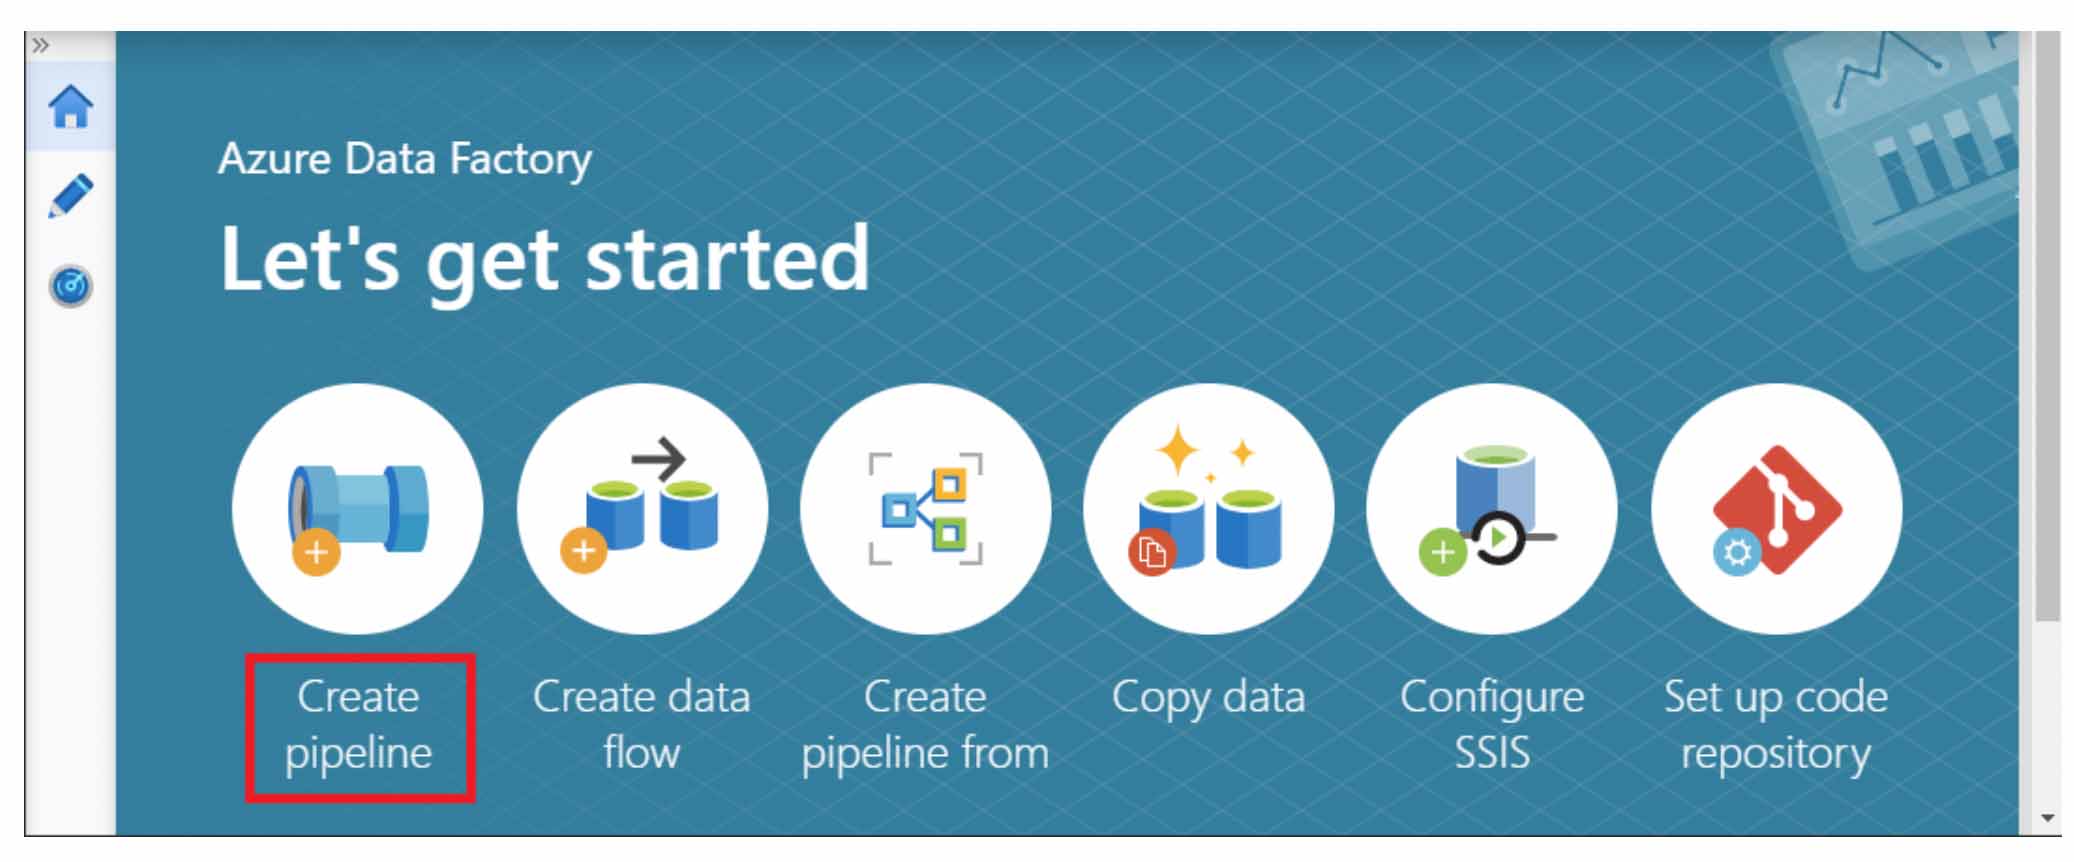 Create a new pipeline in Azure Data Factory